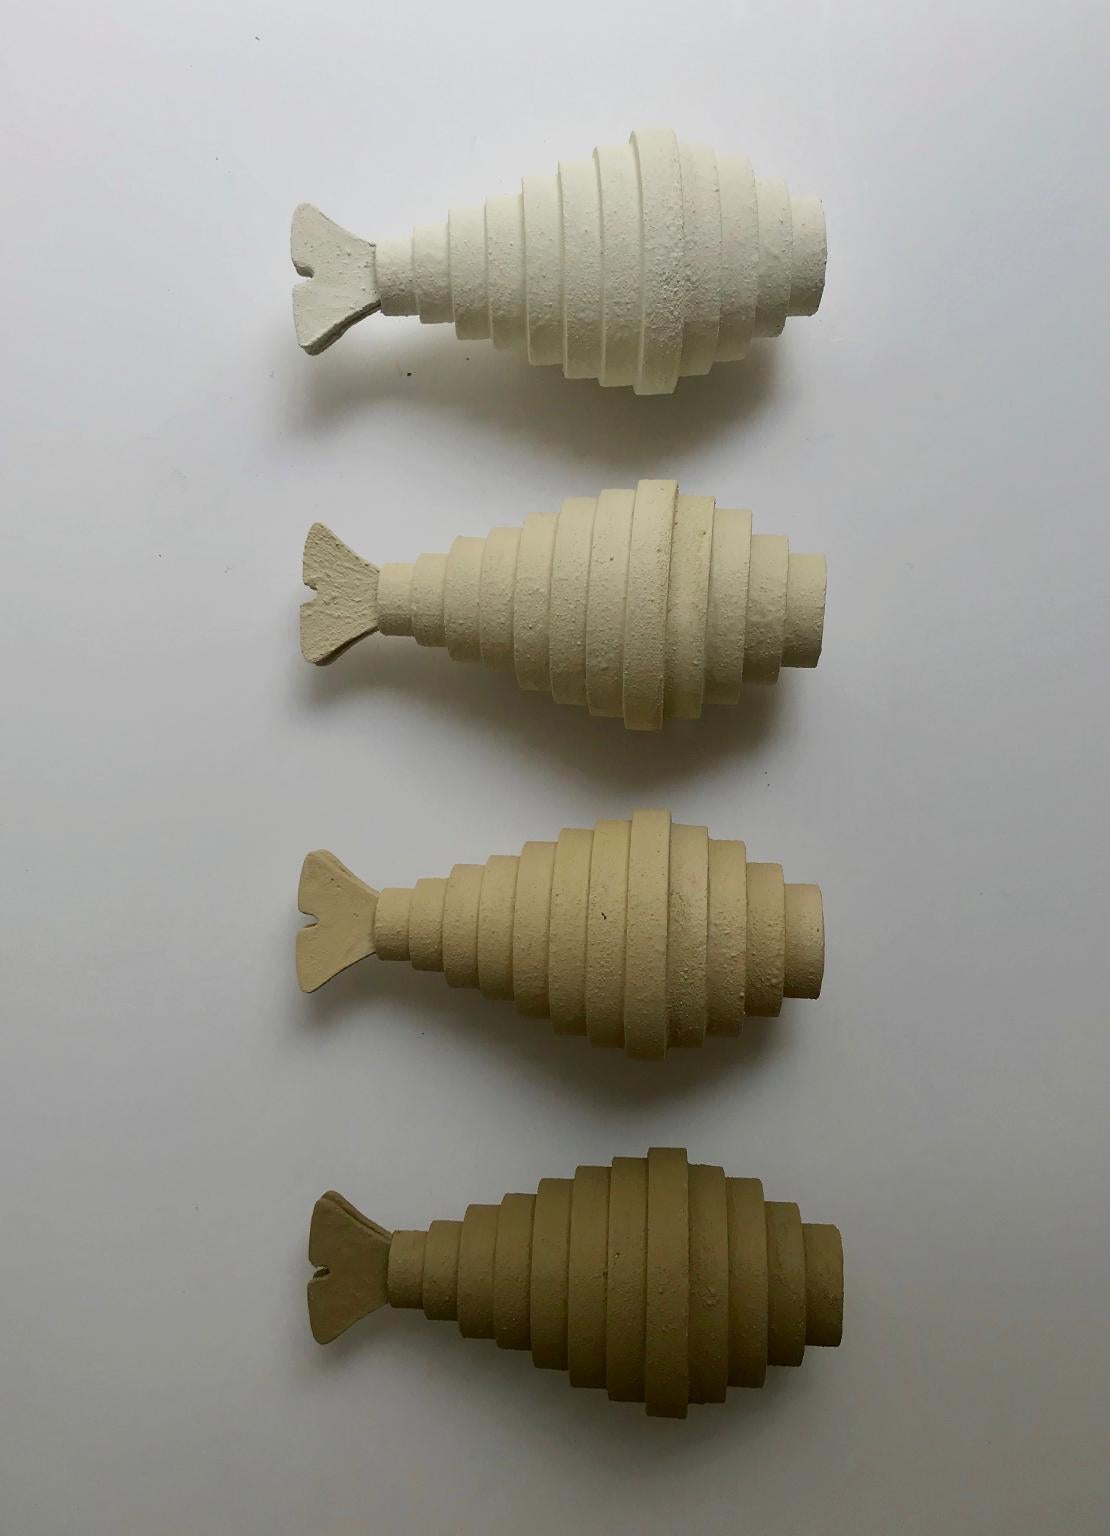 Modern Beach Sculpture Ideal For Walls    Abstract School of Fish Formations  5